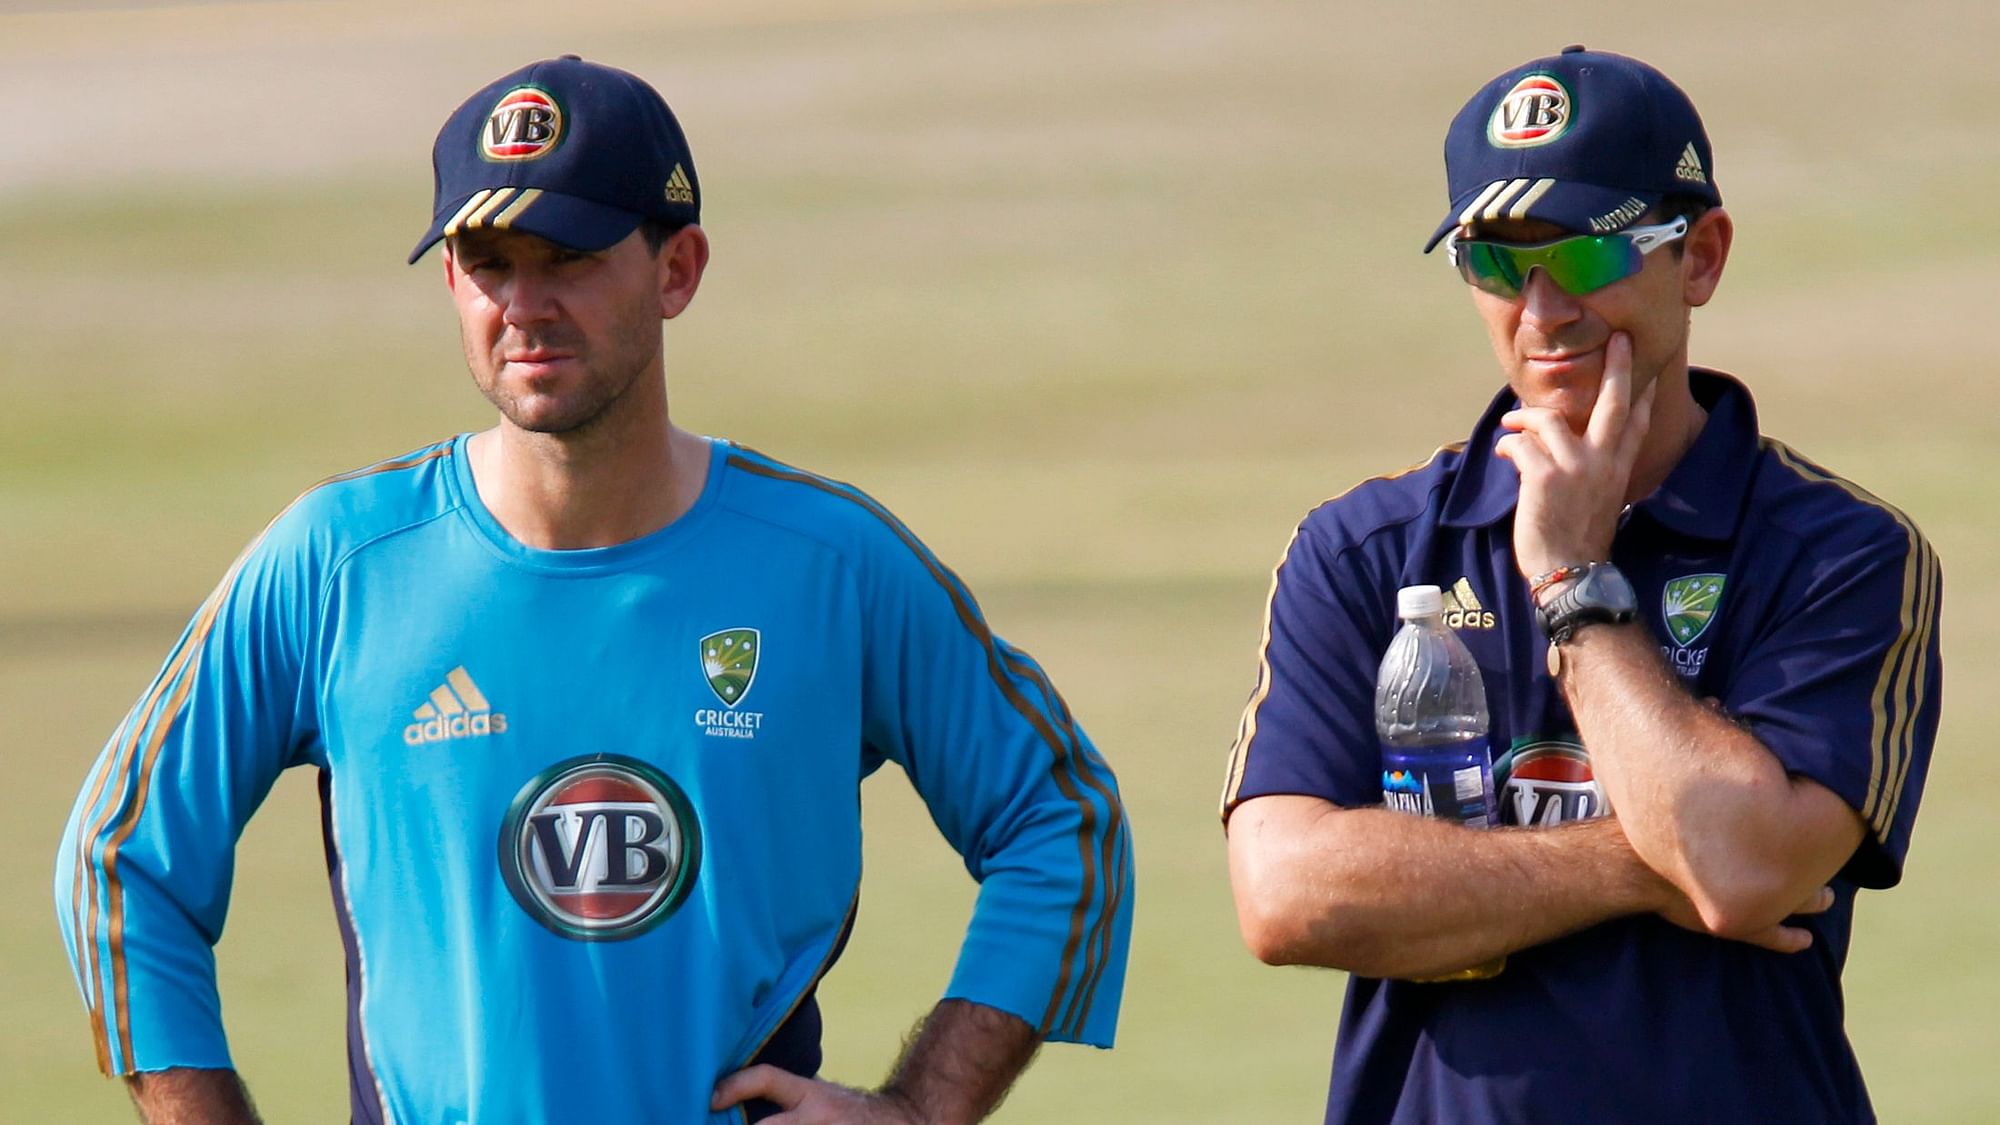 Ricky Ponting will be assisting head coach Justin Langer at the World Cup,